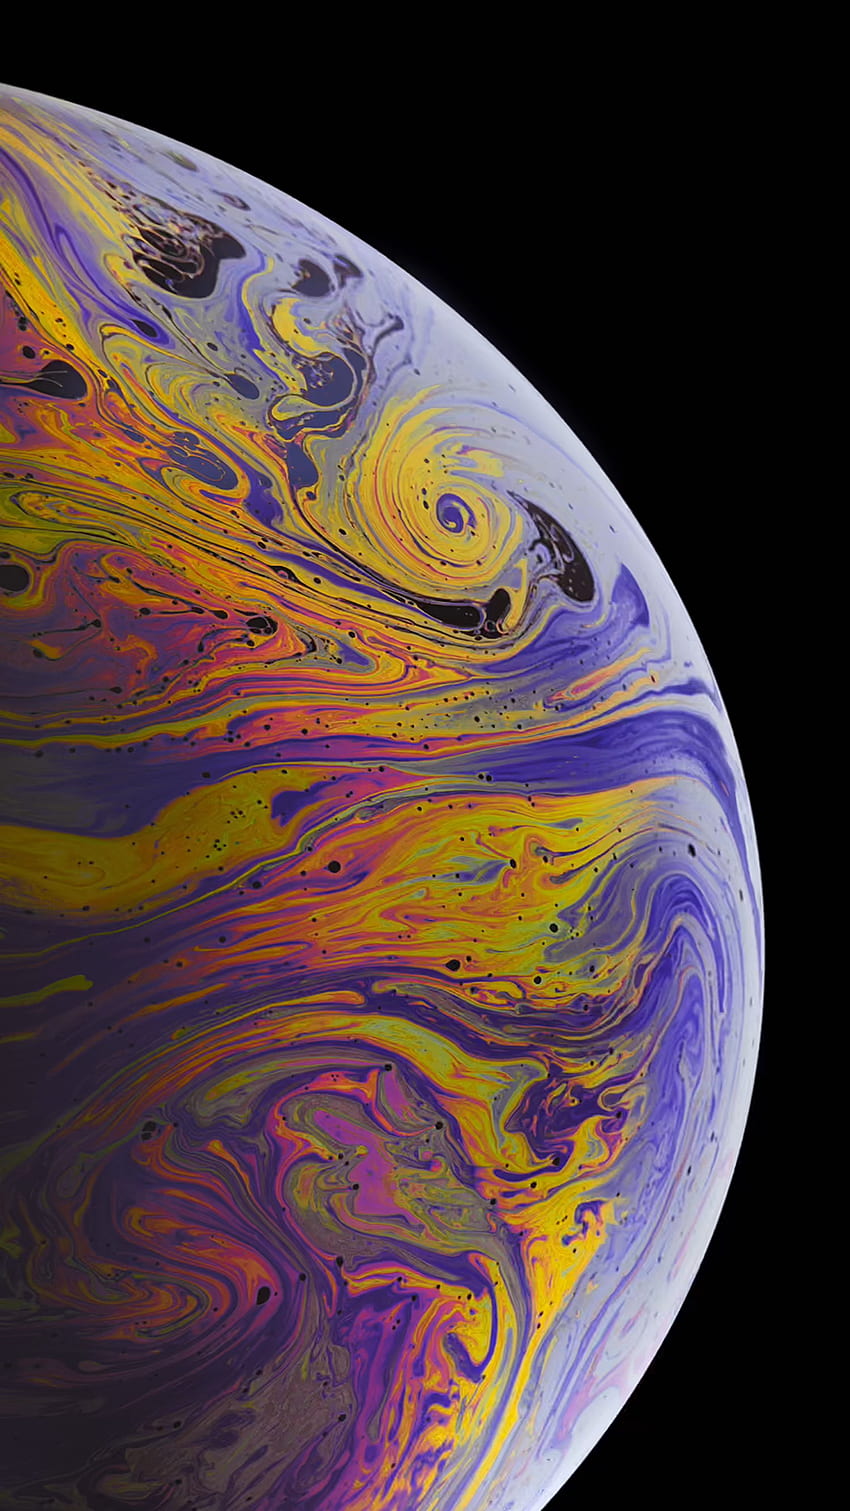 IPhone XS / XR - High Res Optimized for IPhone Plus HD phone wallpaper ...